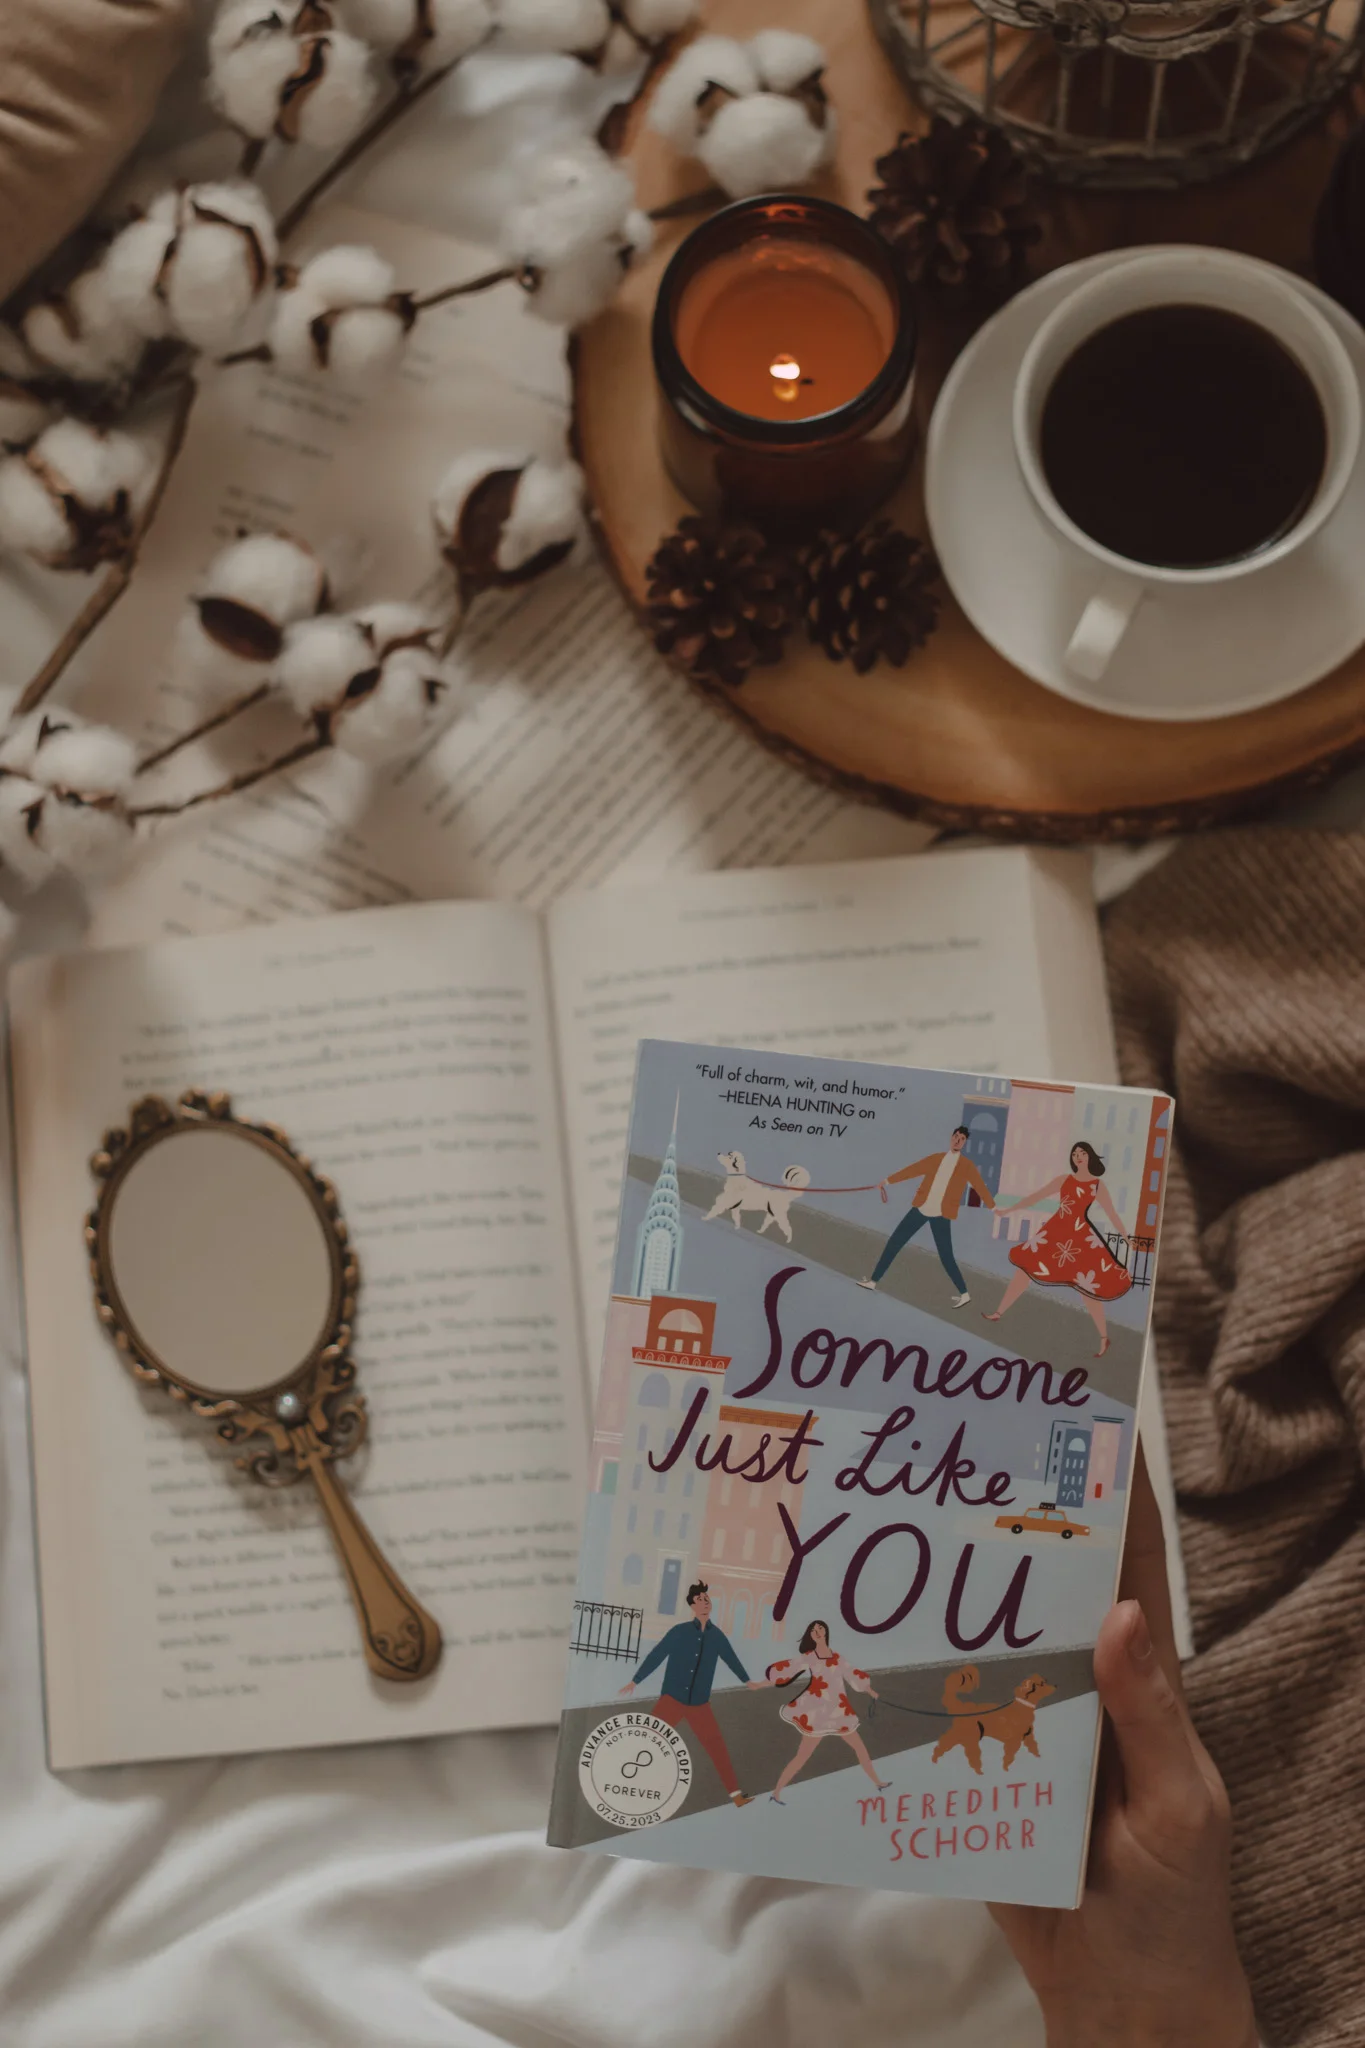 Why “Someone Just Like You” is the Most Fun Enemies-to-Lovers Romance You’ll Read by The Espresso Edition cozy bookish blog